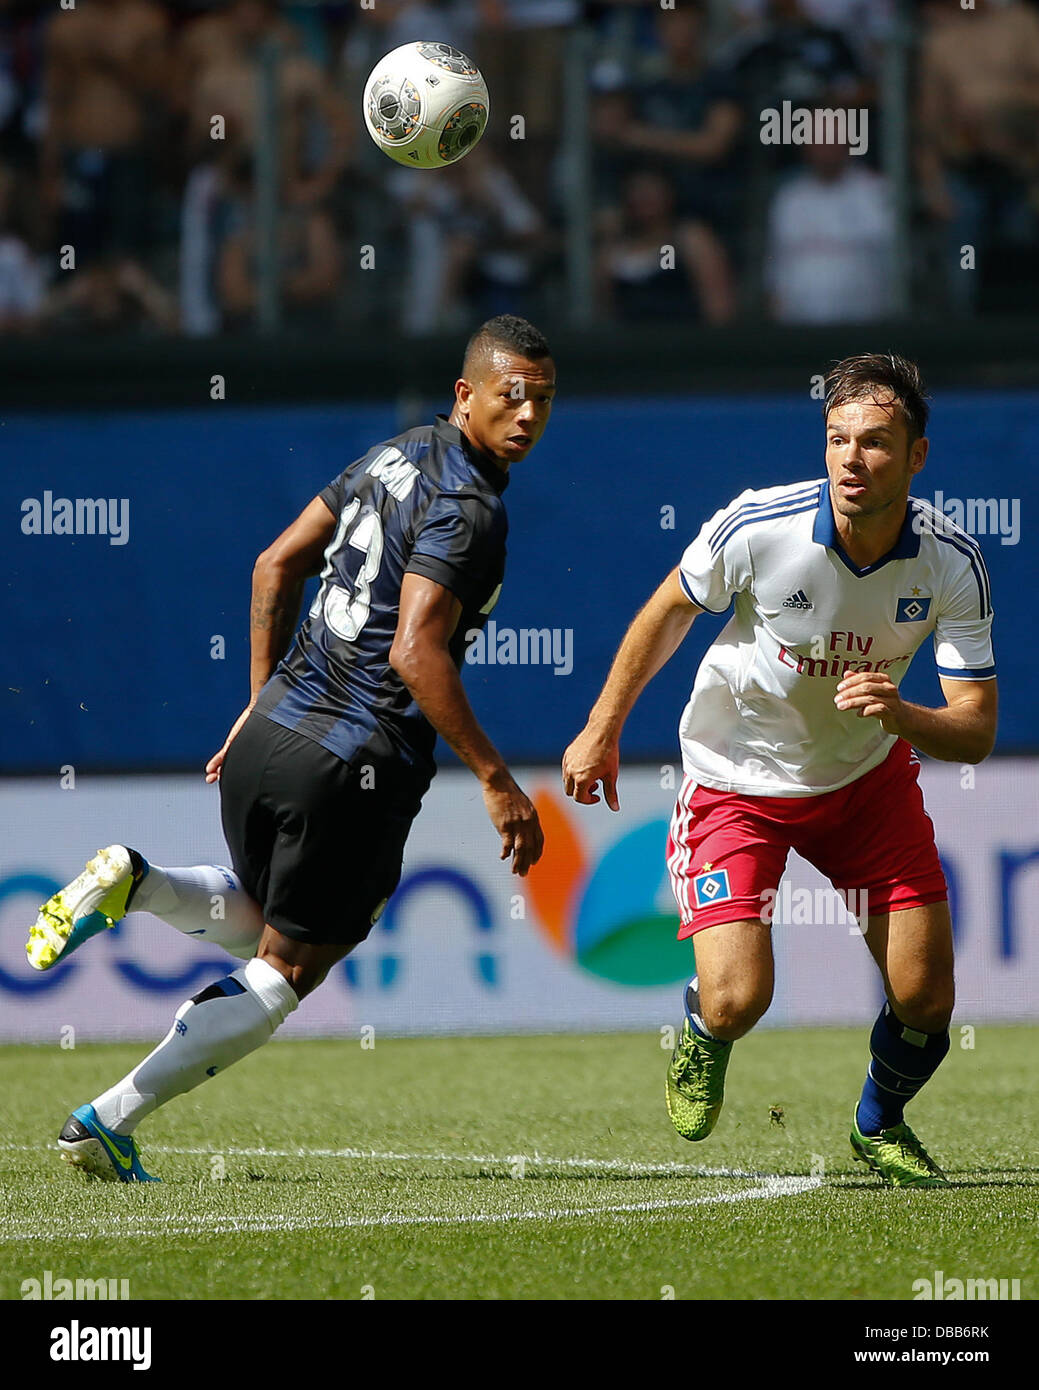 Milan's Fredy Guarin (L) vies for the ball with Hamburg's Heiko Westermann during the test match between Hamburger SV and Inter Milan at Imtech Arena in Hamburg, Germany, 27 July 2013. Photo: AXEL HEIMKEN Stock Photo